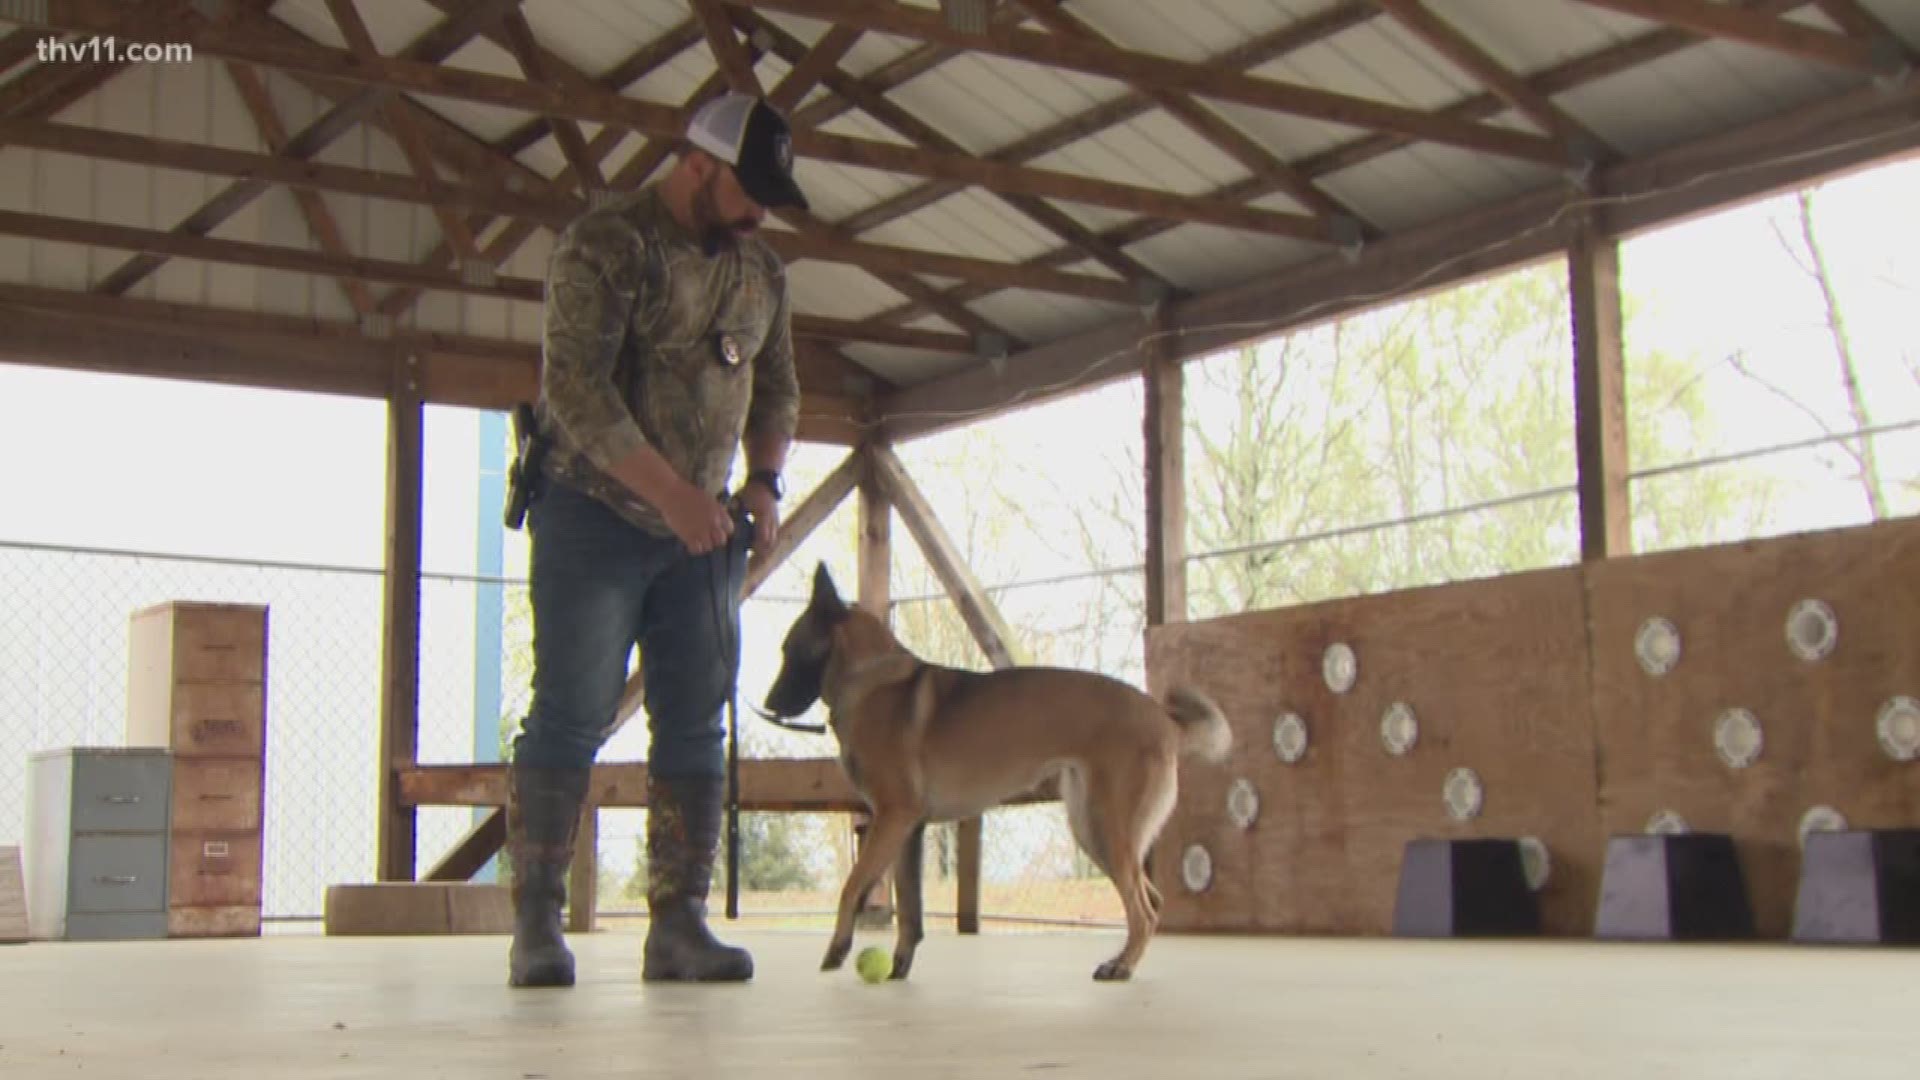 In January, Lonoke county had to put down their only drug dog because he got bone cancer. Now they have not one, not two, but three new officers.